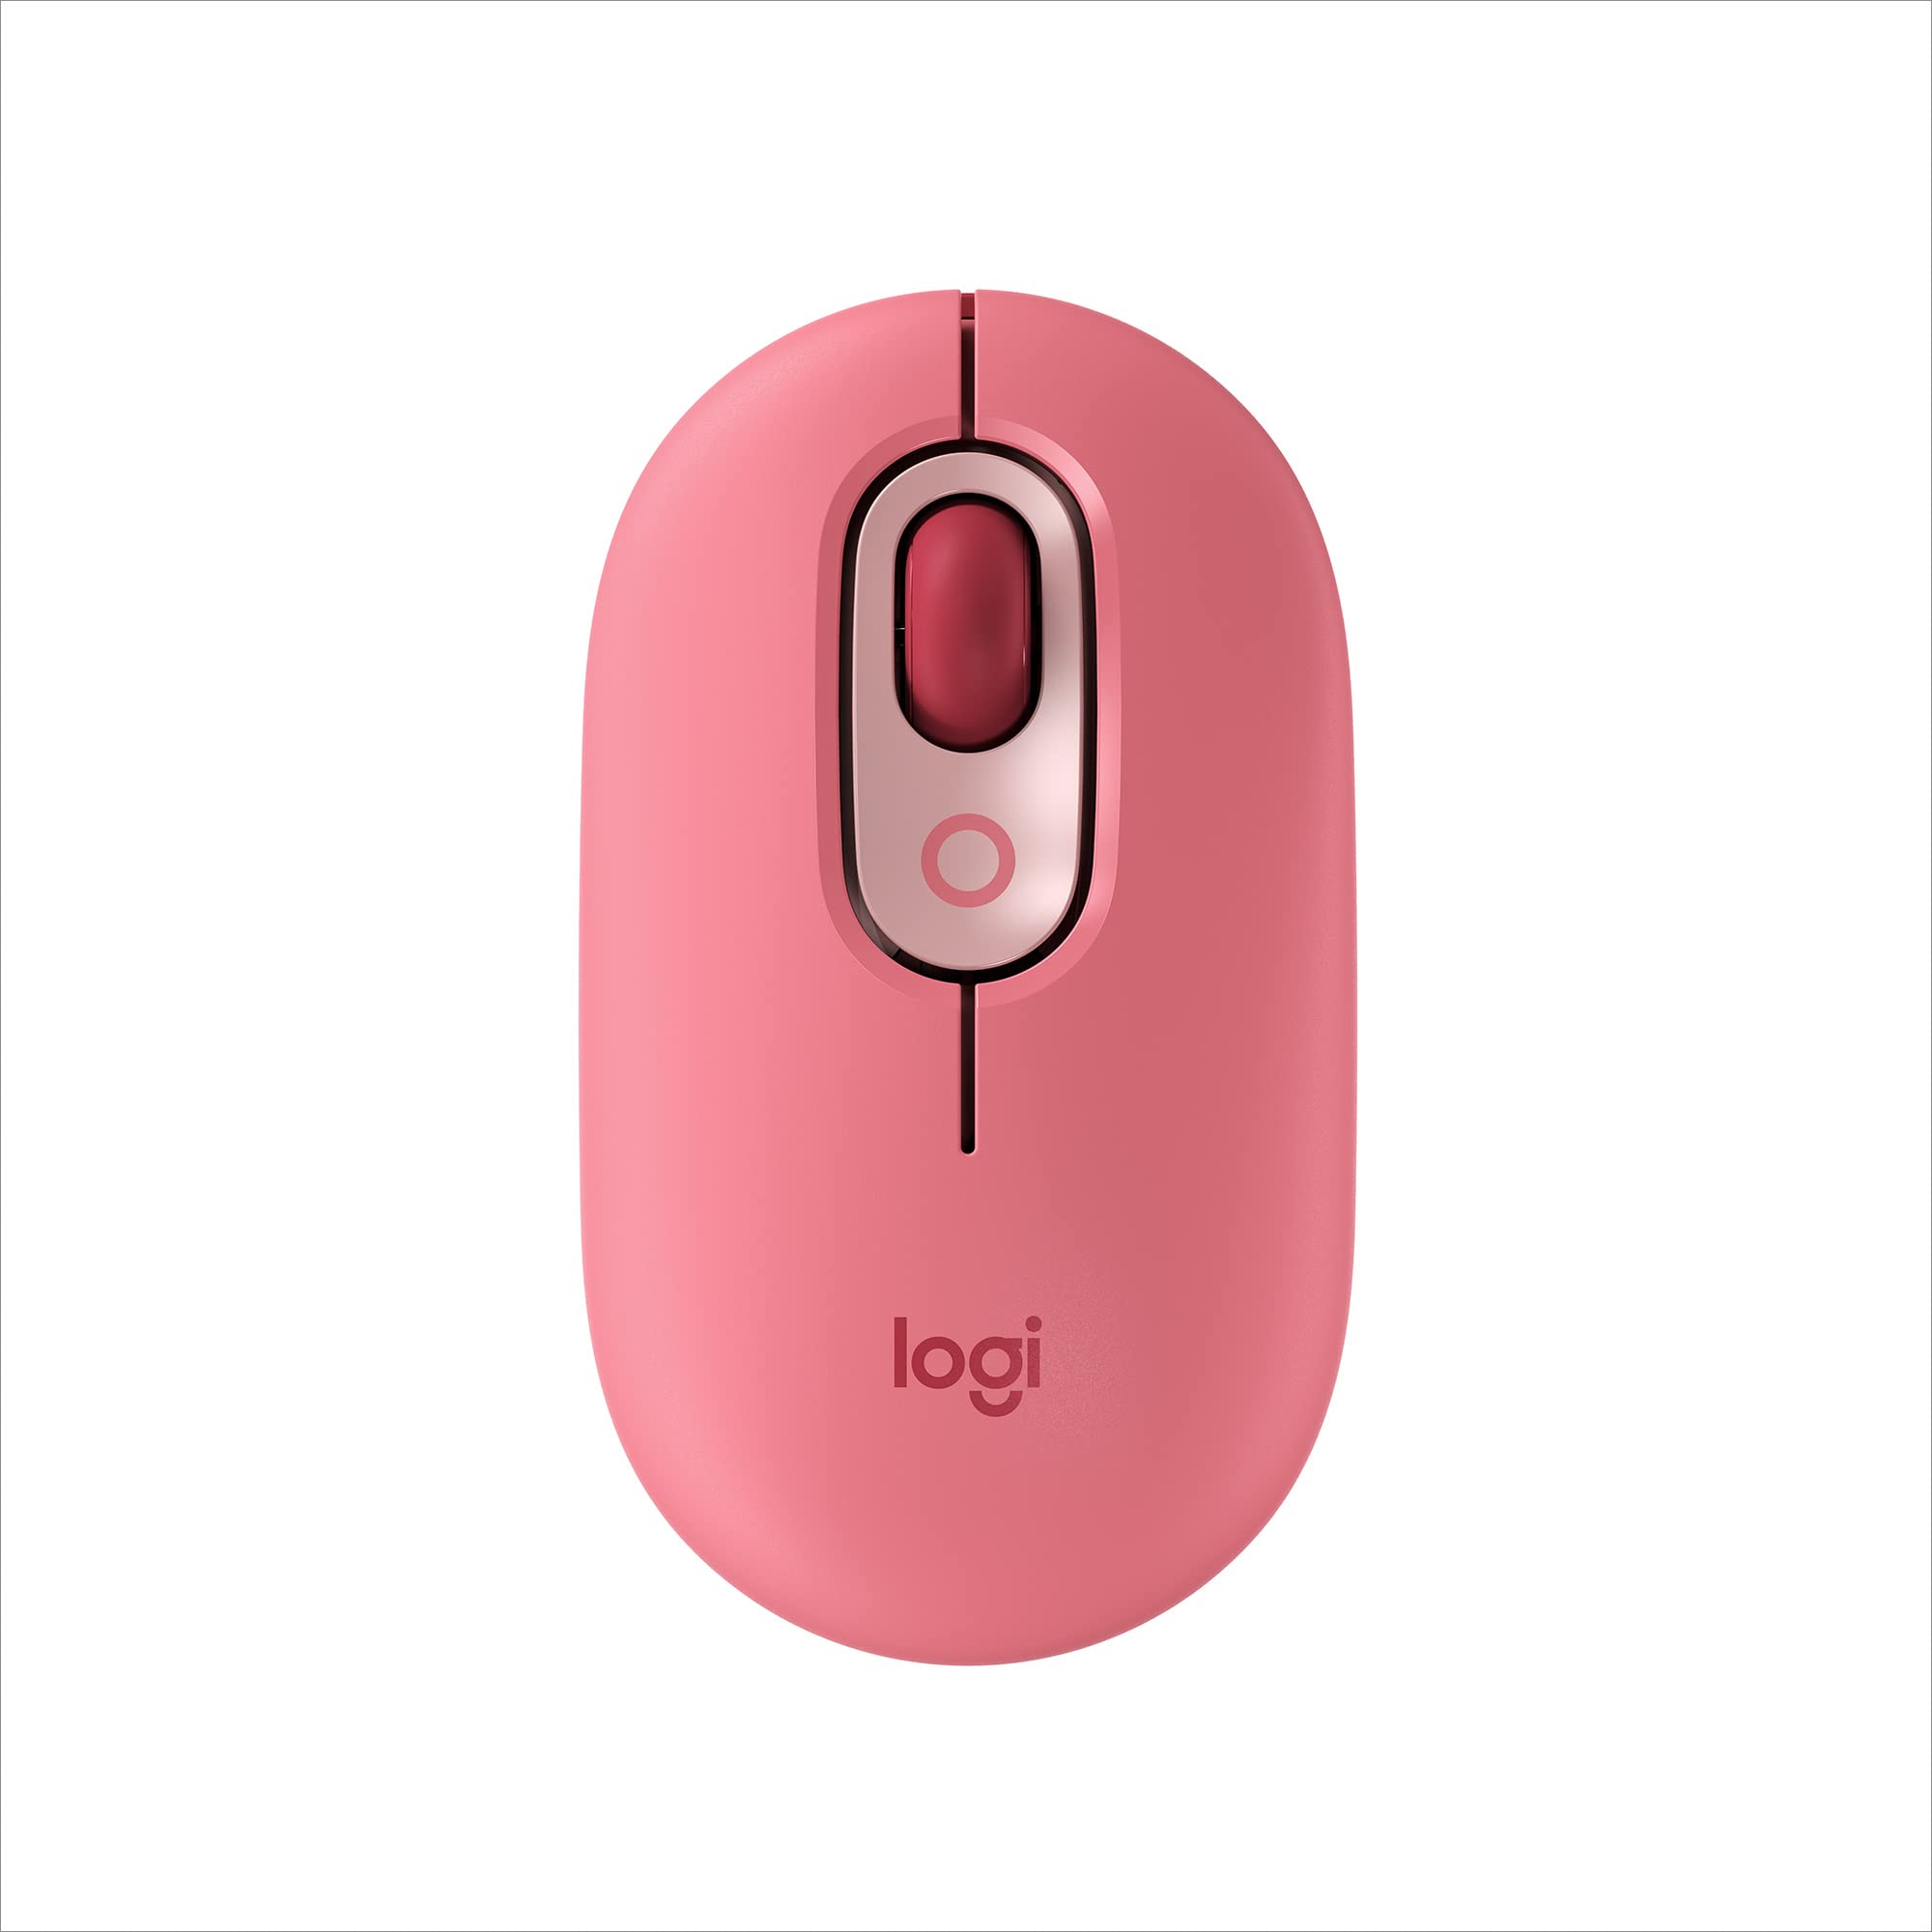 Wireless mouse with disconnected icon